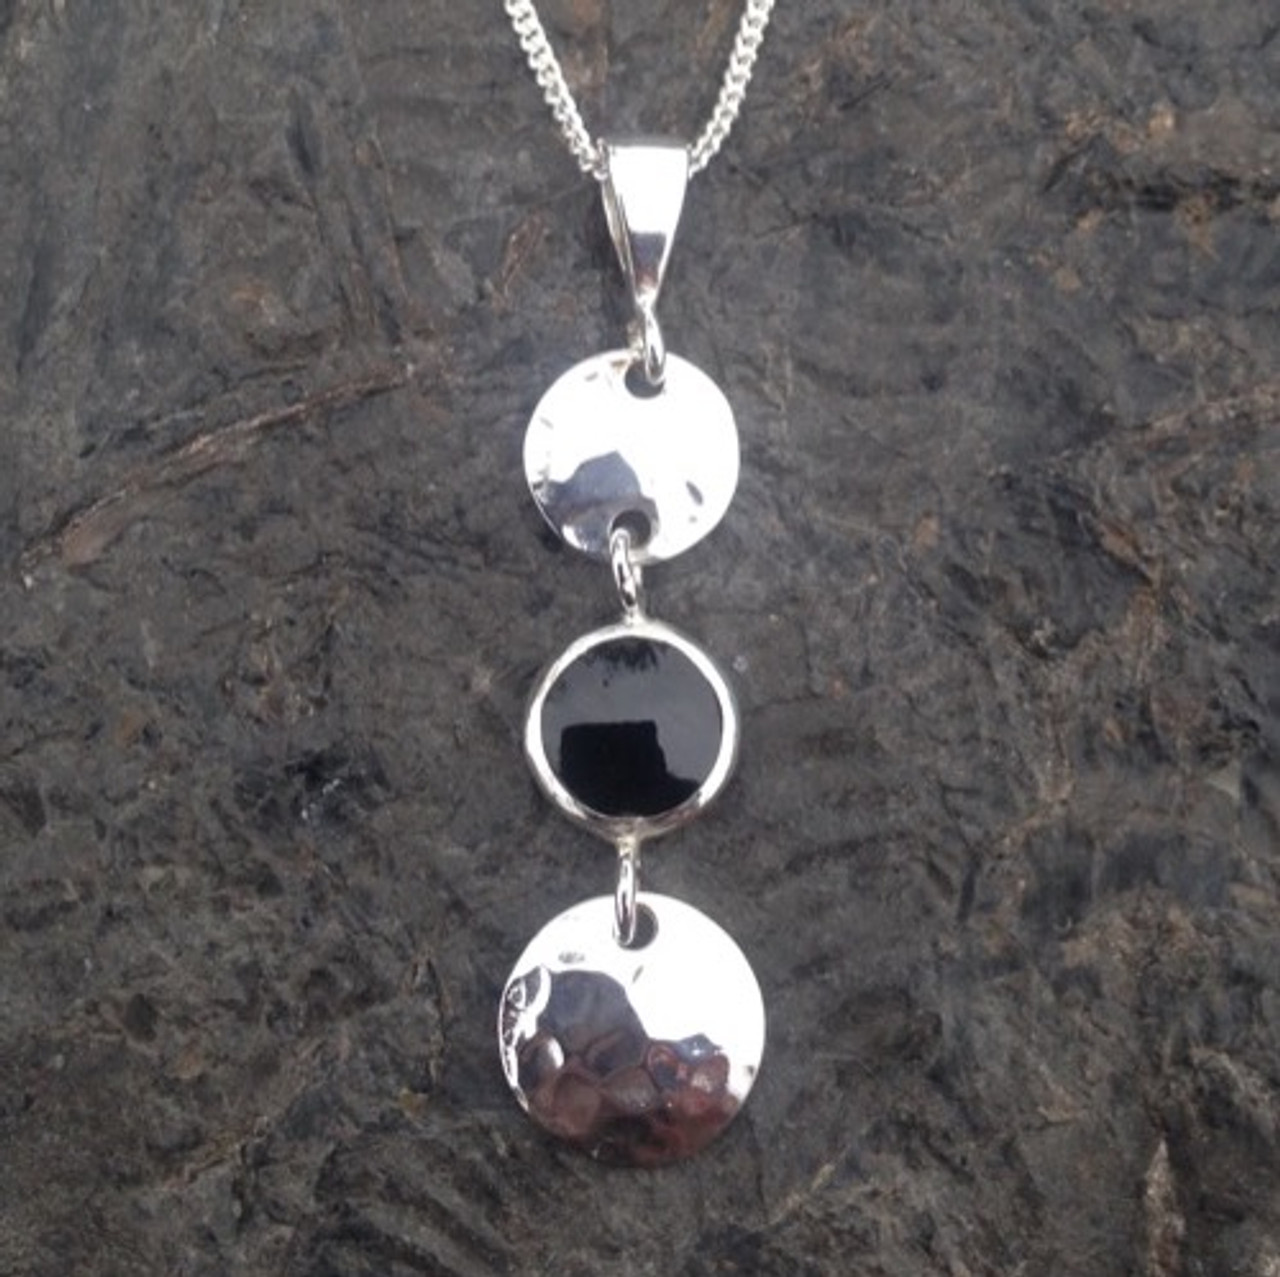 Silver Seven Disc Necklace with a Satin Finish - The Makery Collection